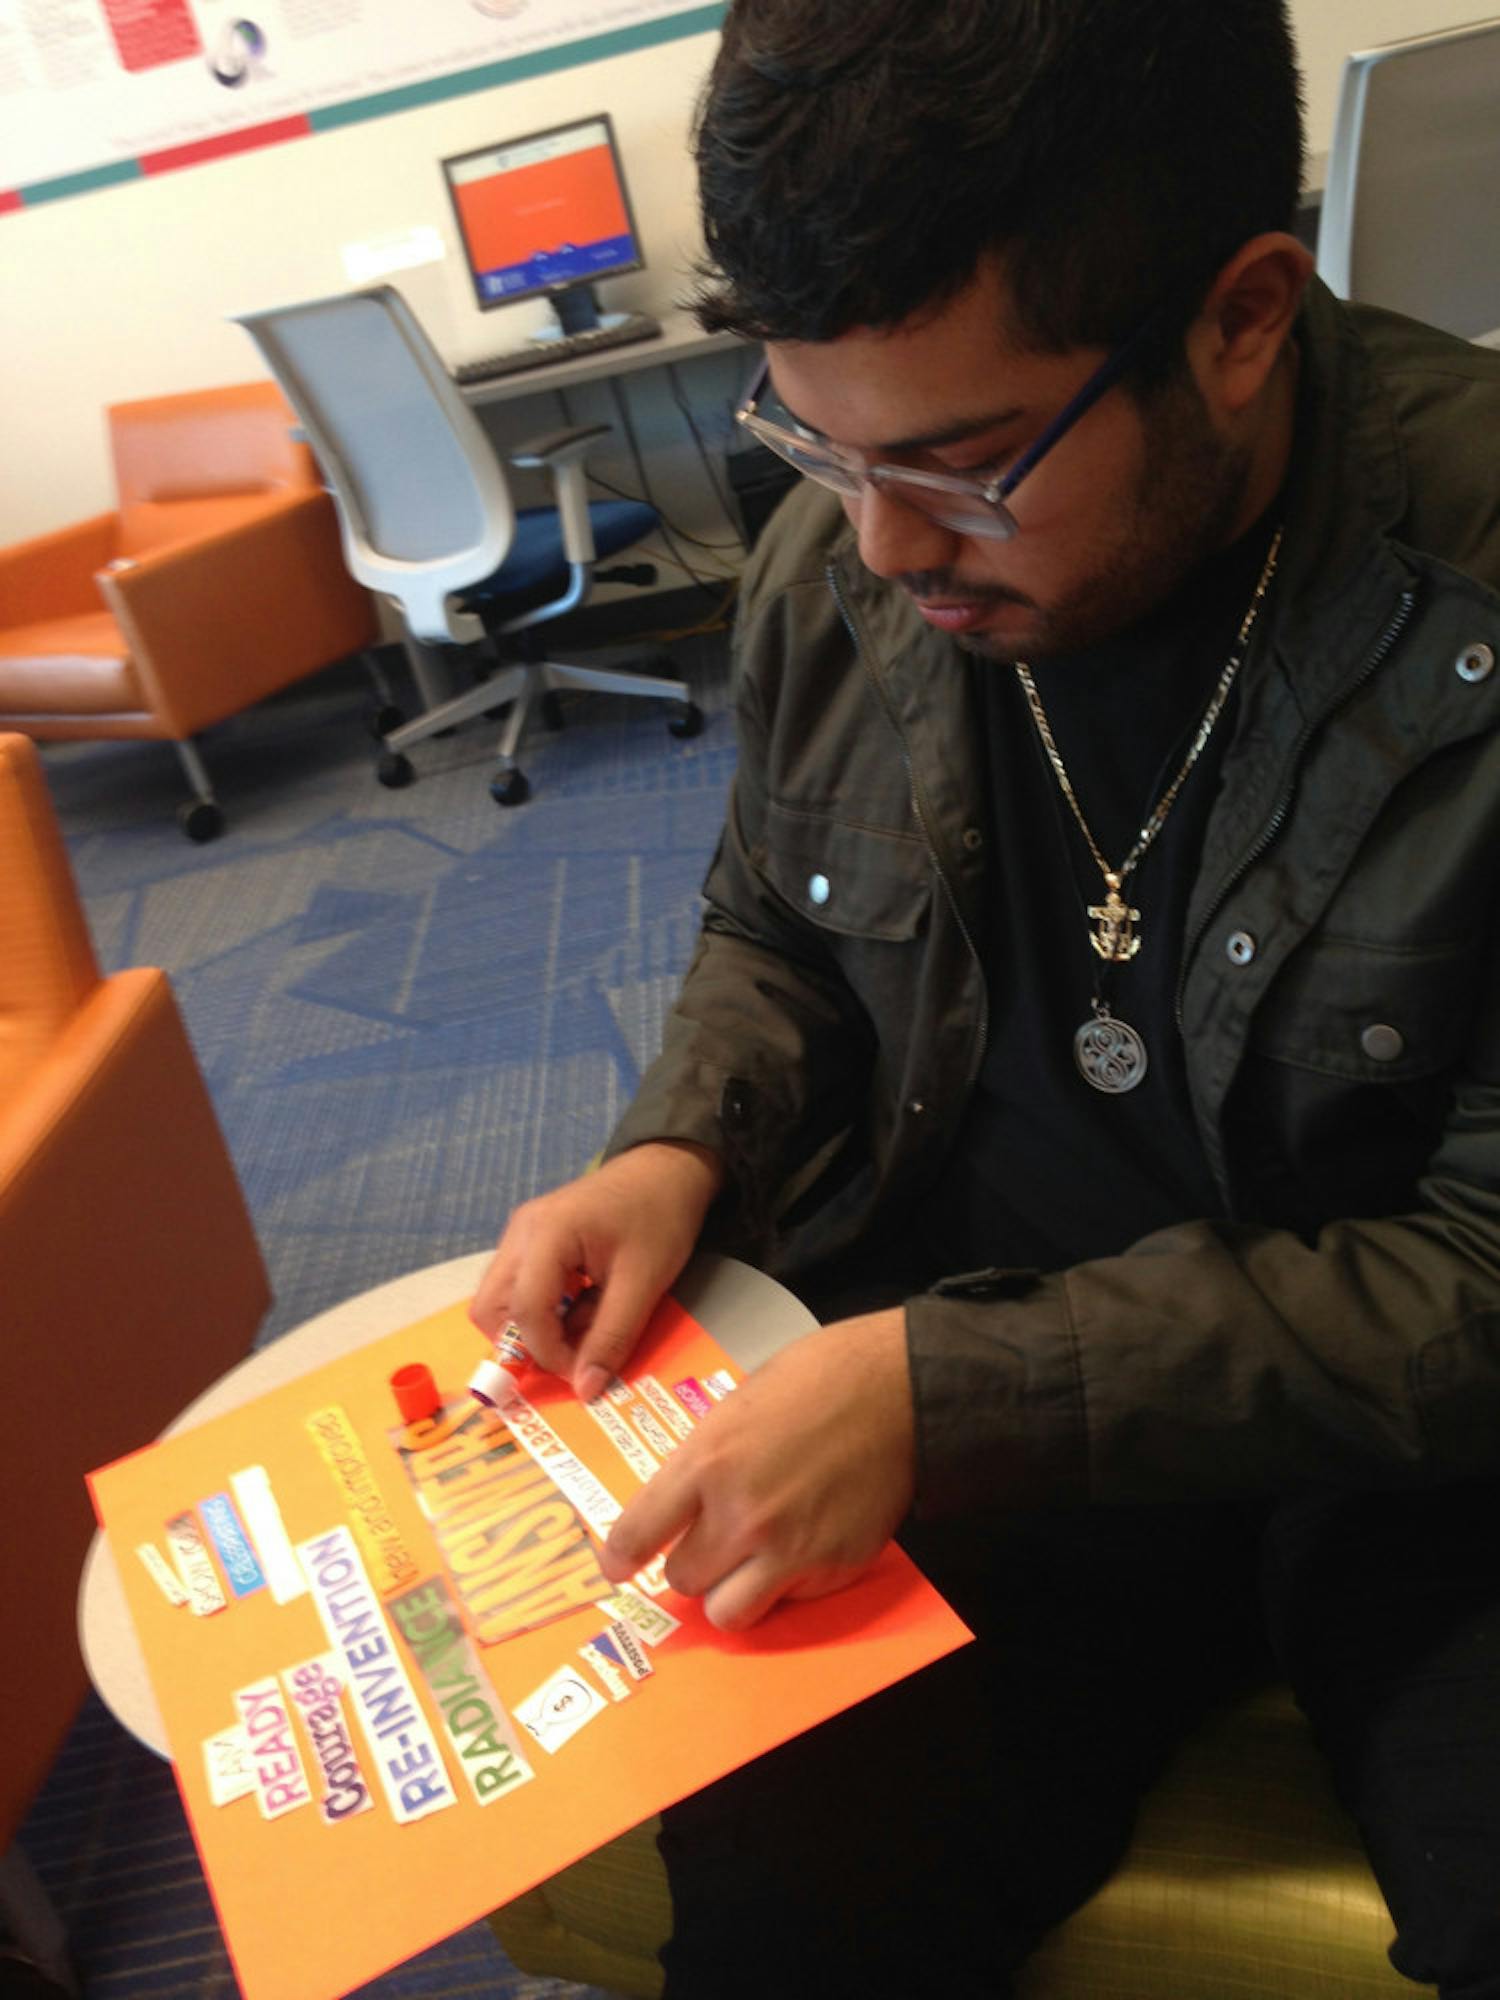 Cristian Laureano, a 20-year-old UF criminology senior, pastes cut-out magazine headlines onto a collage representing his New Year’s resolution to improve all aspects of his life. Laureano was participating in Multicultural and Diversity Affairs “Decolonizing New Year’s Resolutions” event on Monday from 2 p.m. to 4 p.m. 